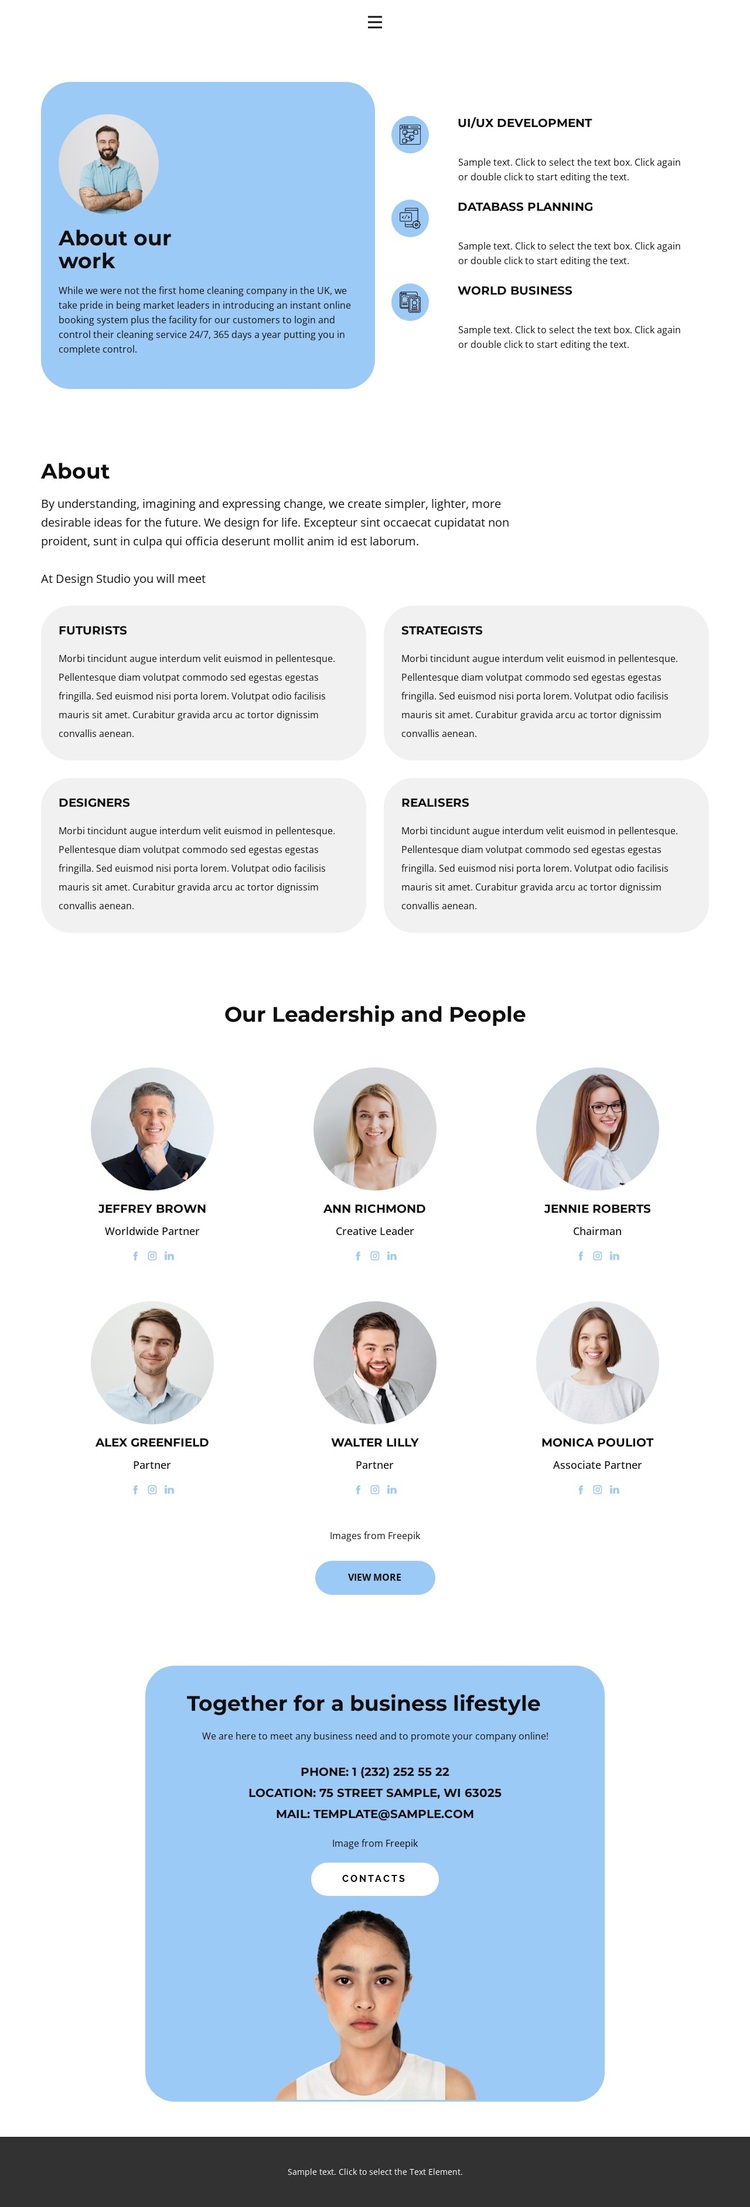 We work together Template